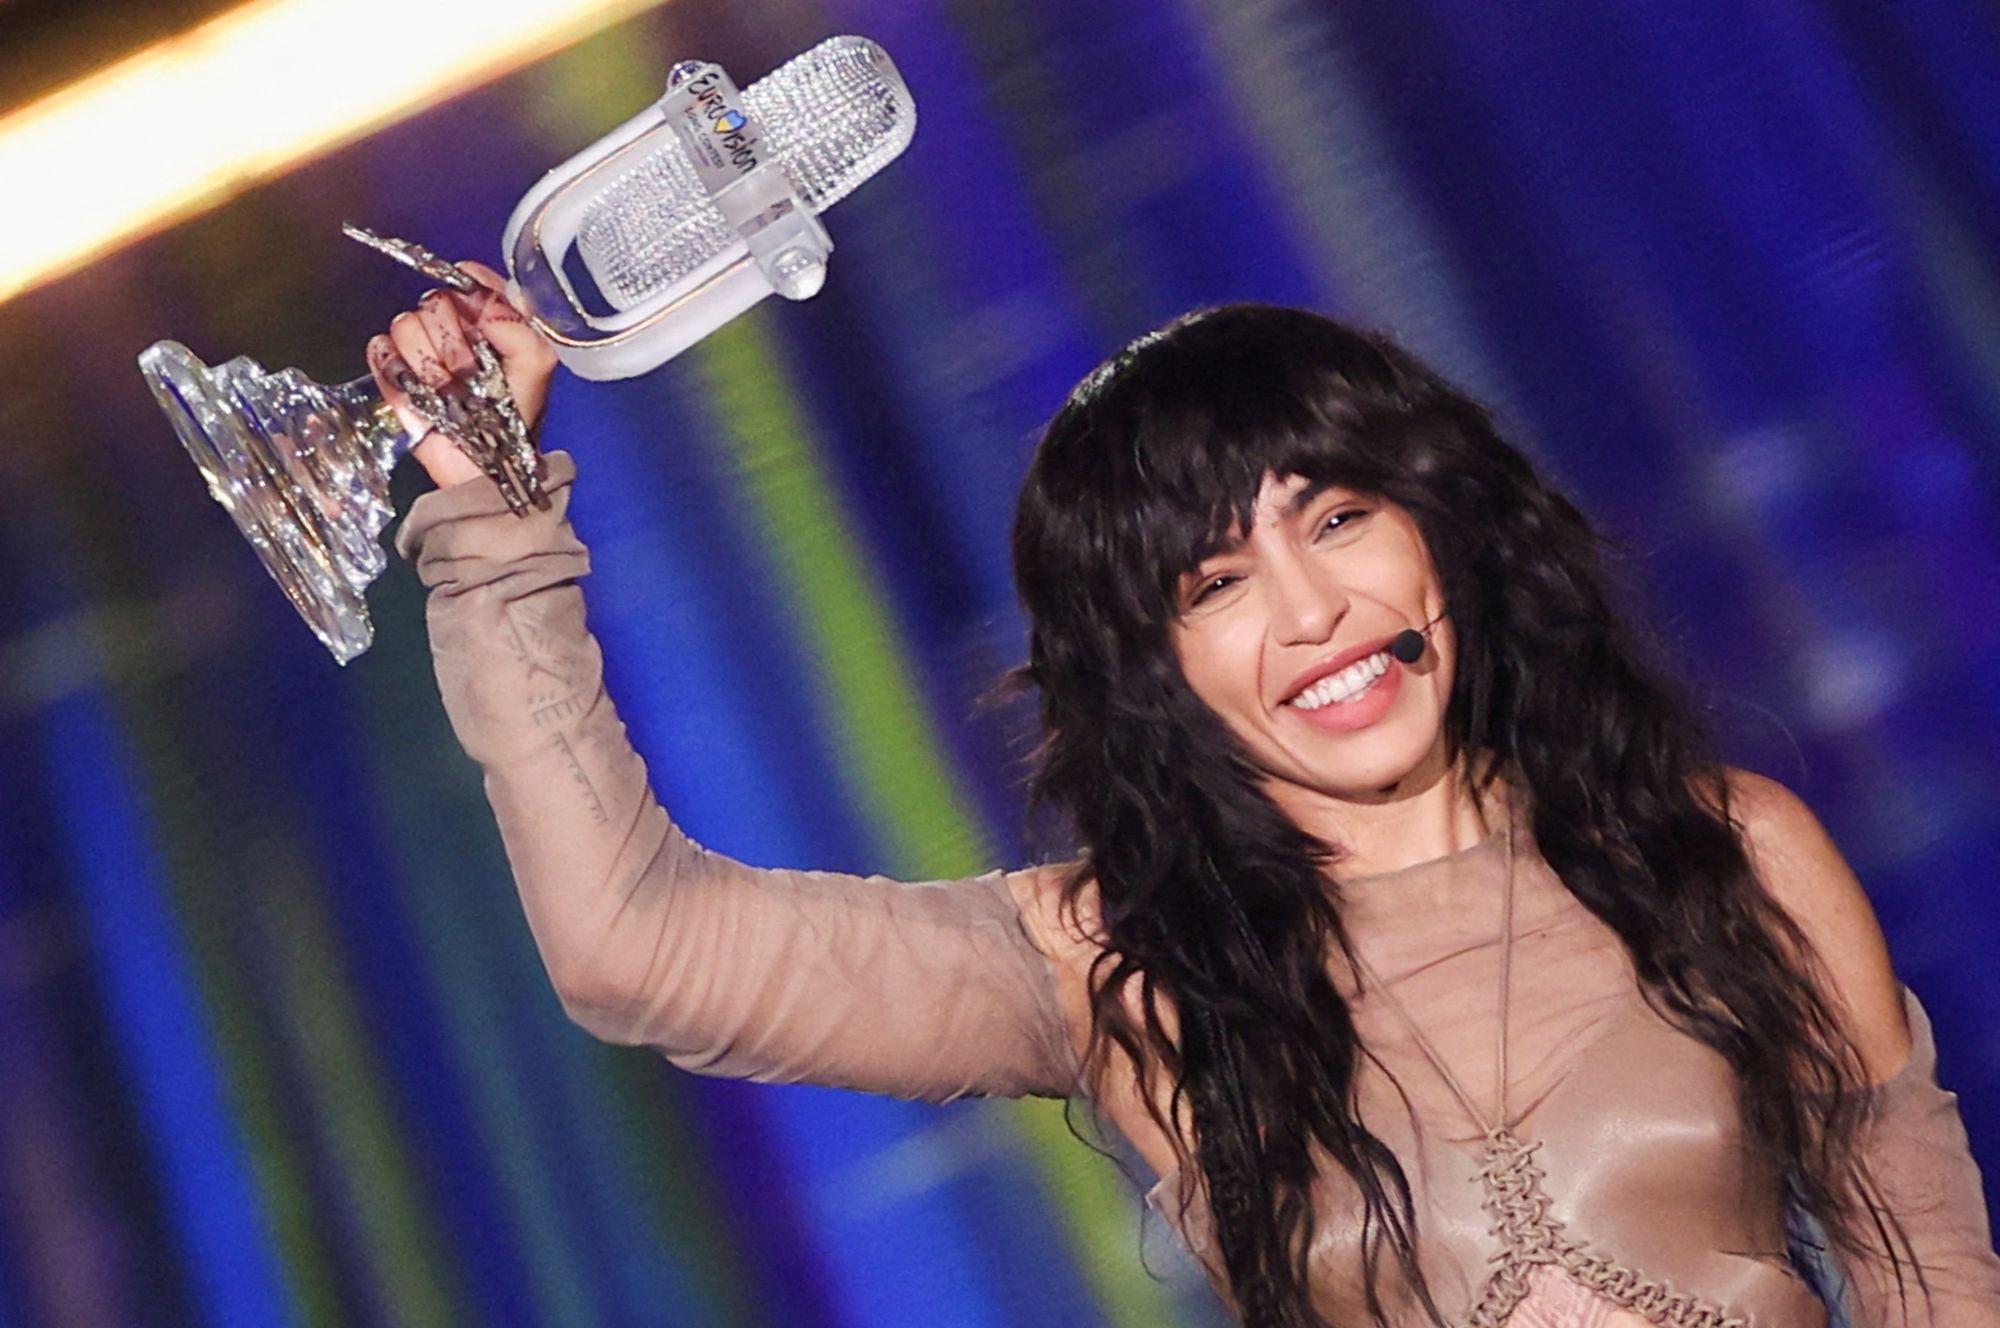 Loreen from Sweden wins Eurovision